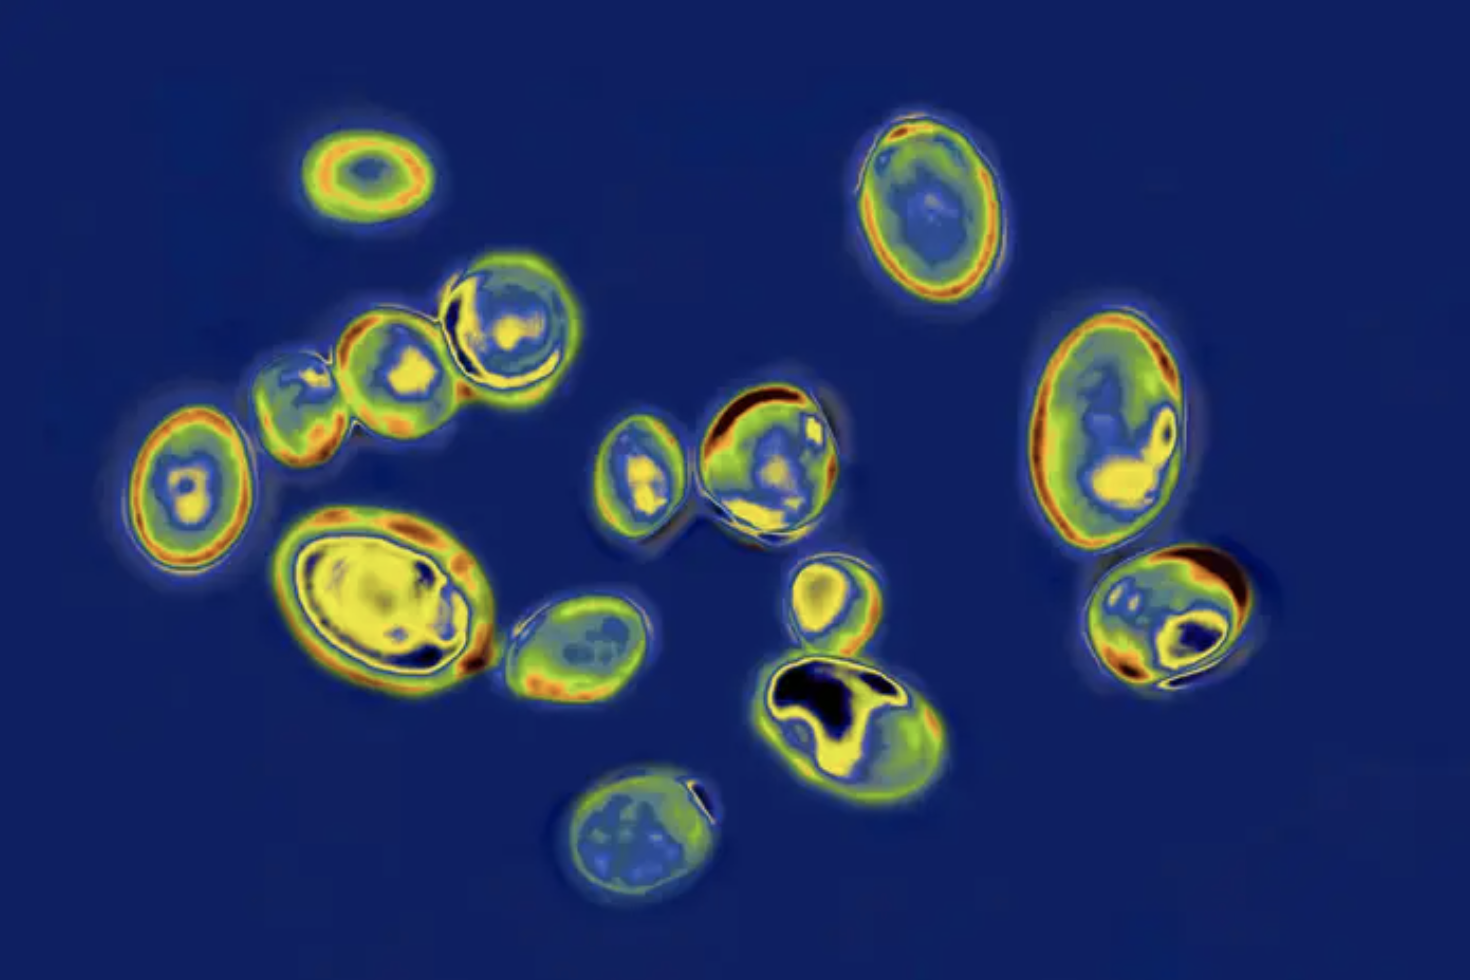 a microscopic view of greenish blue pathogen particles